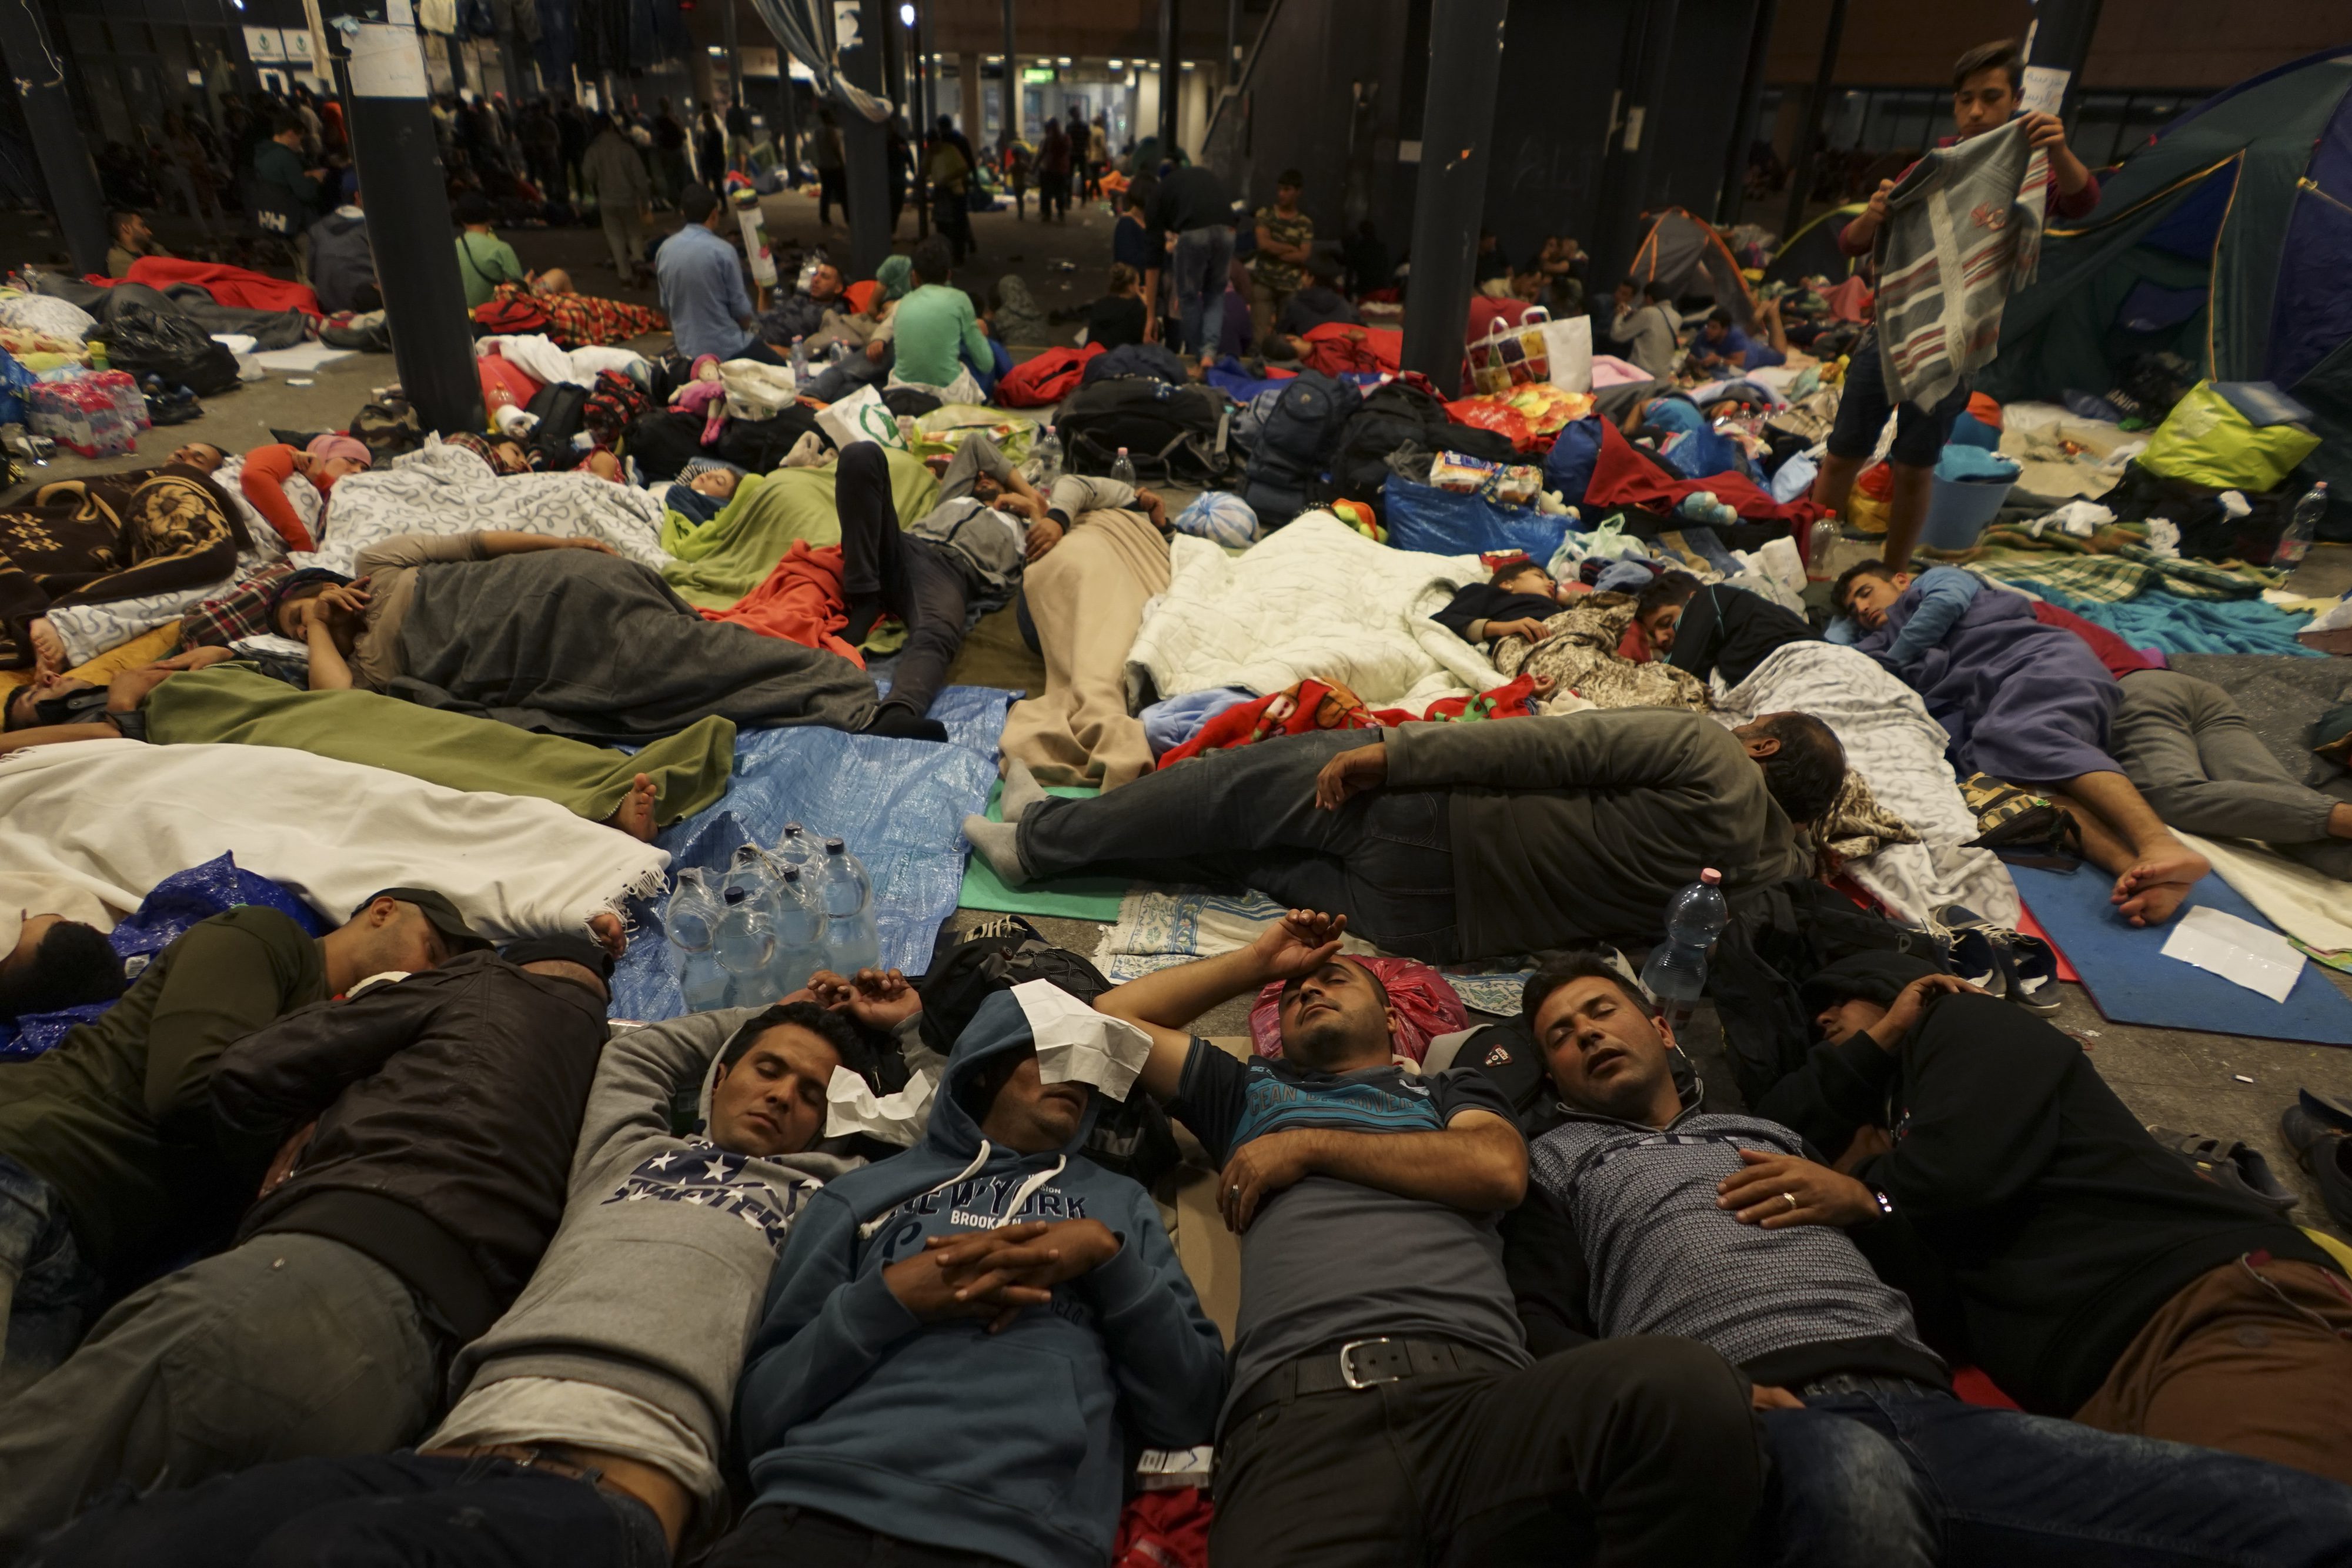 Syrian refugees resting on the floor at the Keleti railway station in Budapest, Hungary. Wikimedia Commons.